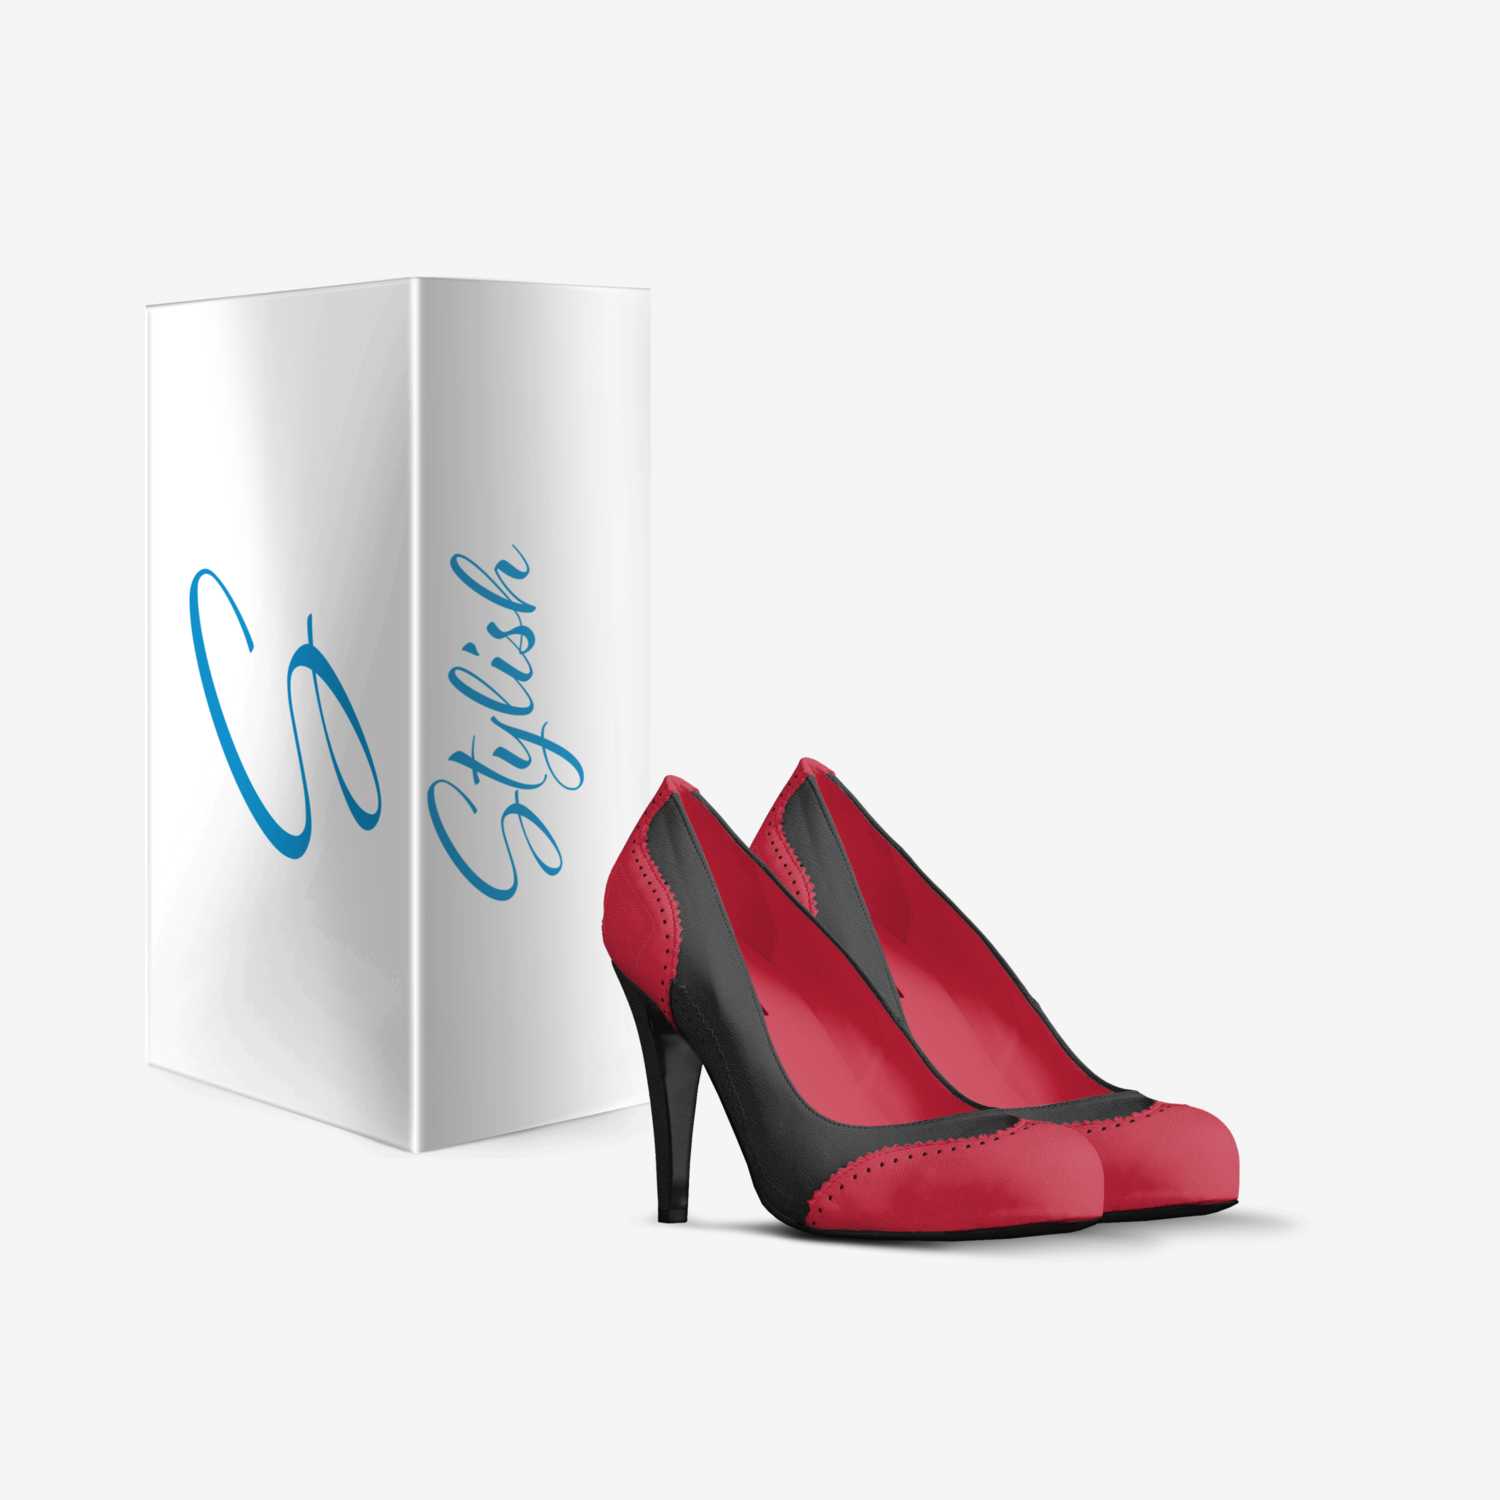 Stylish Leytte   custom made in Italy shoes by Wesley Loyd | Box view